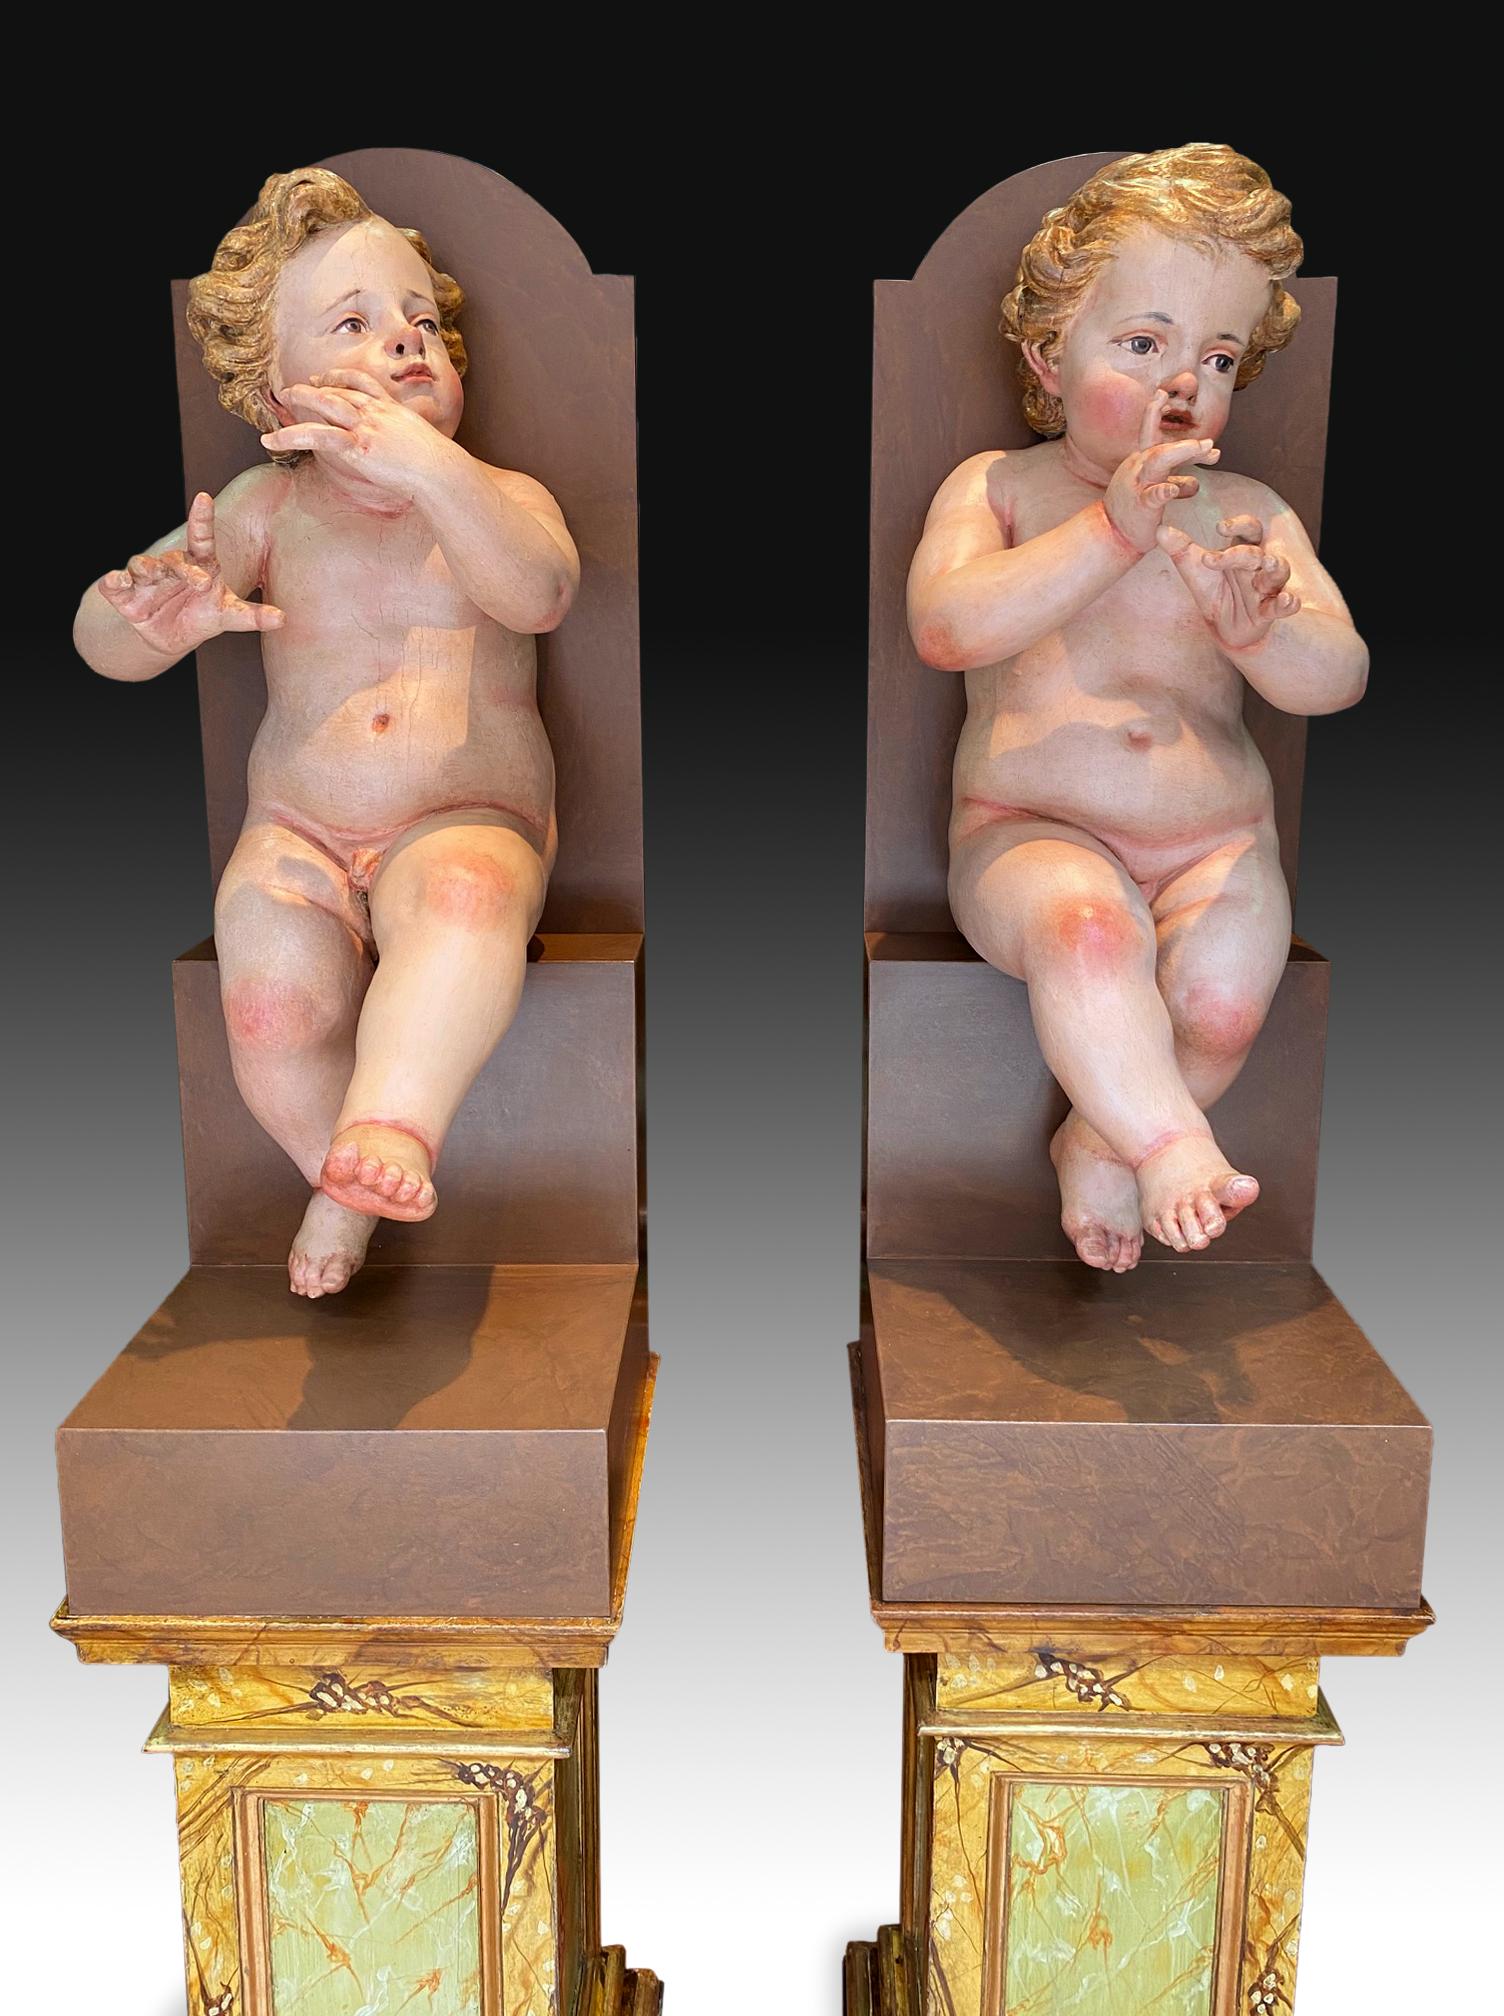 Couple of children. Polychrome pine wood, Century XVIII.
Pair of polychrome pine wood carvings that represent two children in an attitude of playing a musical wind instrument, both seated, with their hands towards their faces, and slightly raising